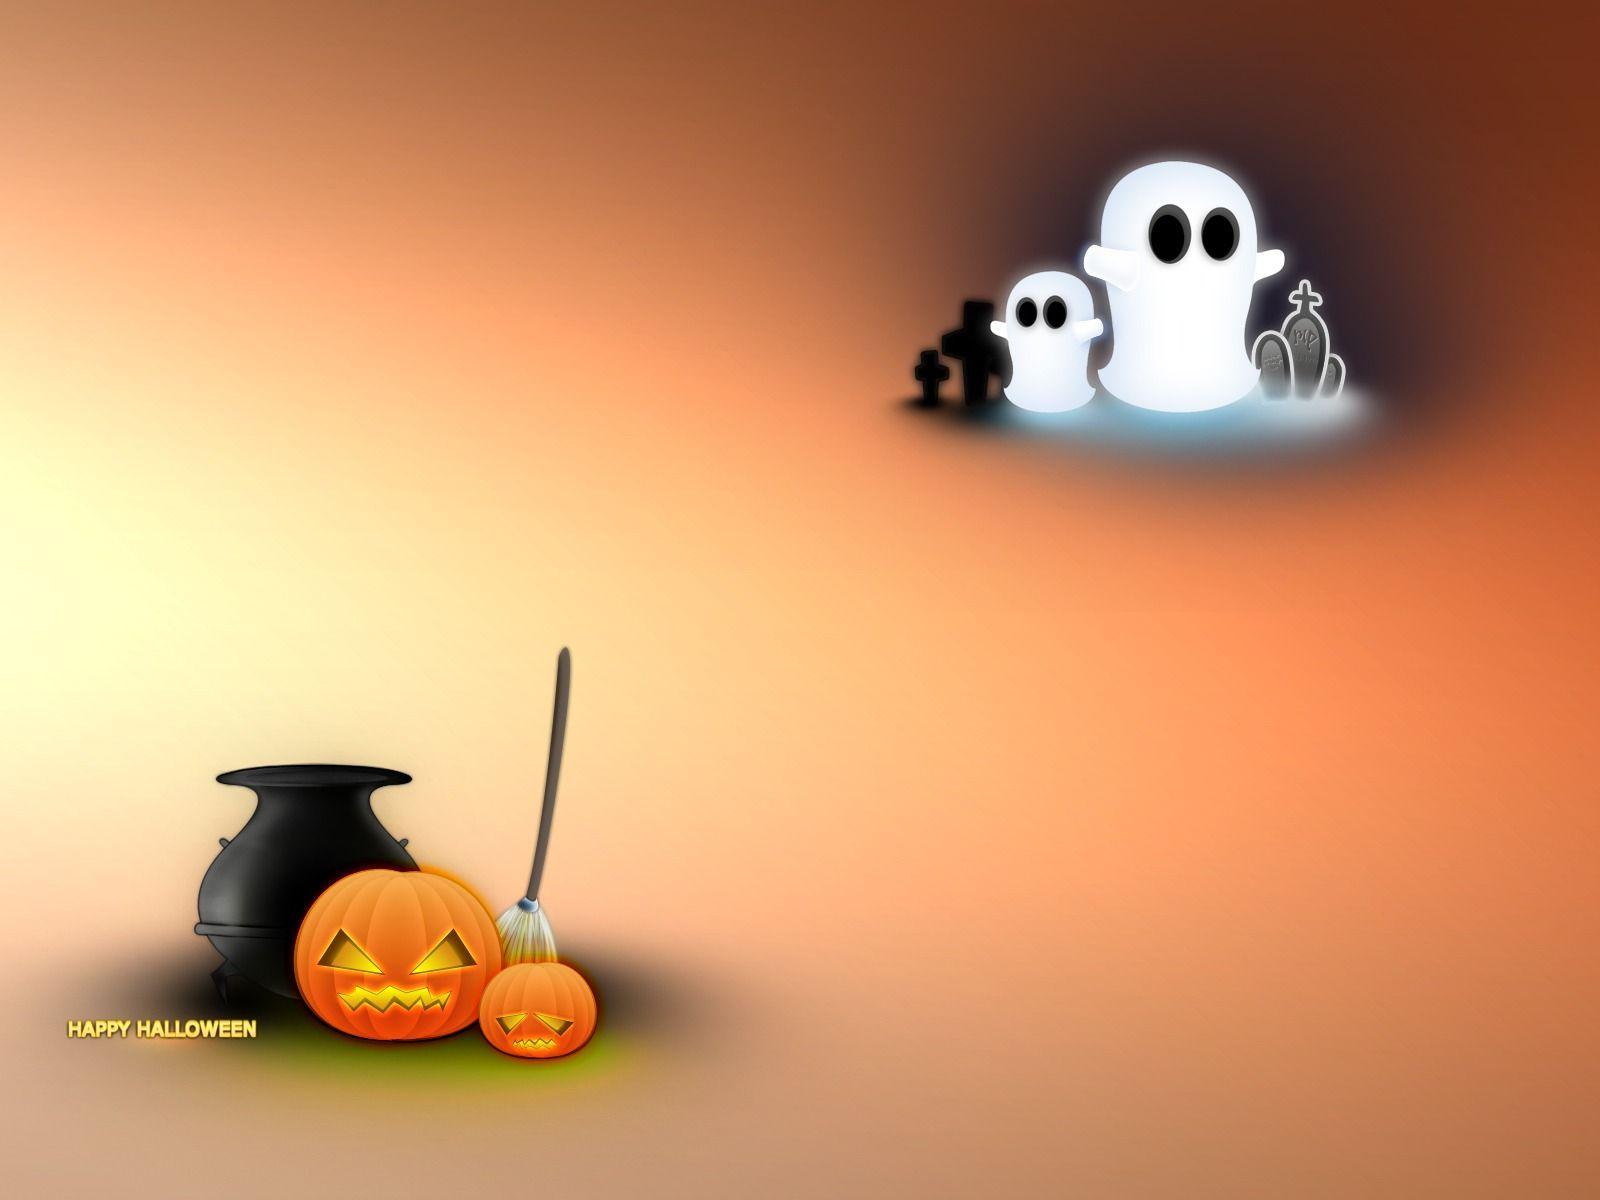 Halloween background OurSweetSerendipity.com #Goals